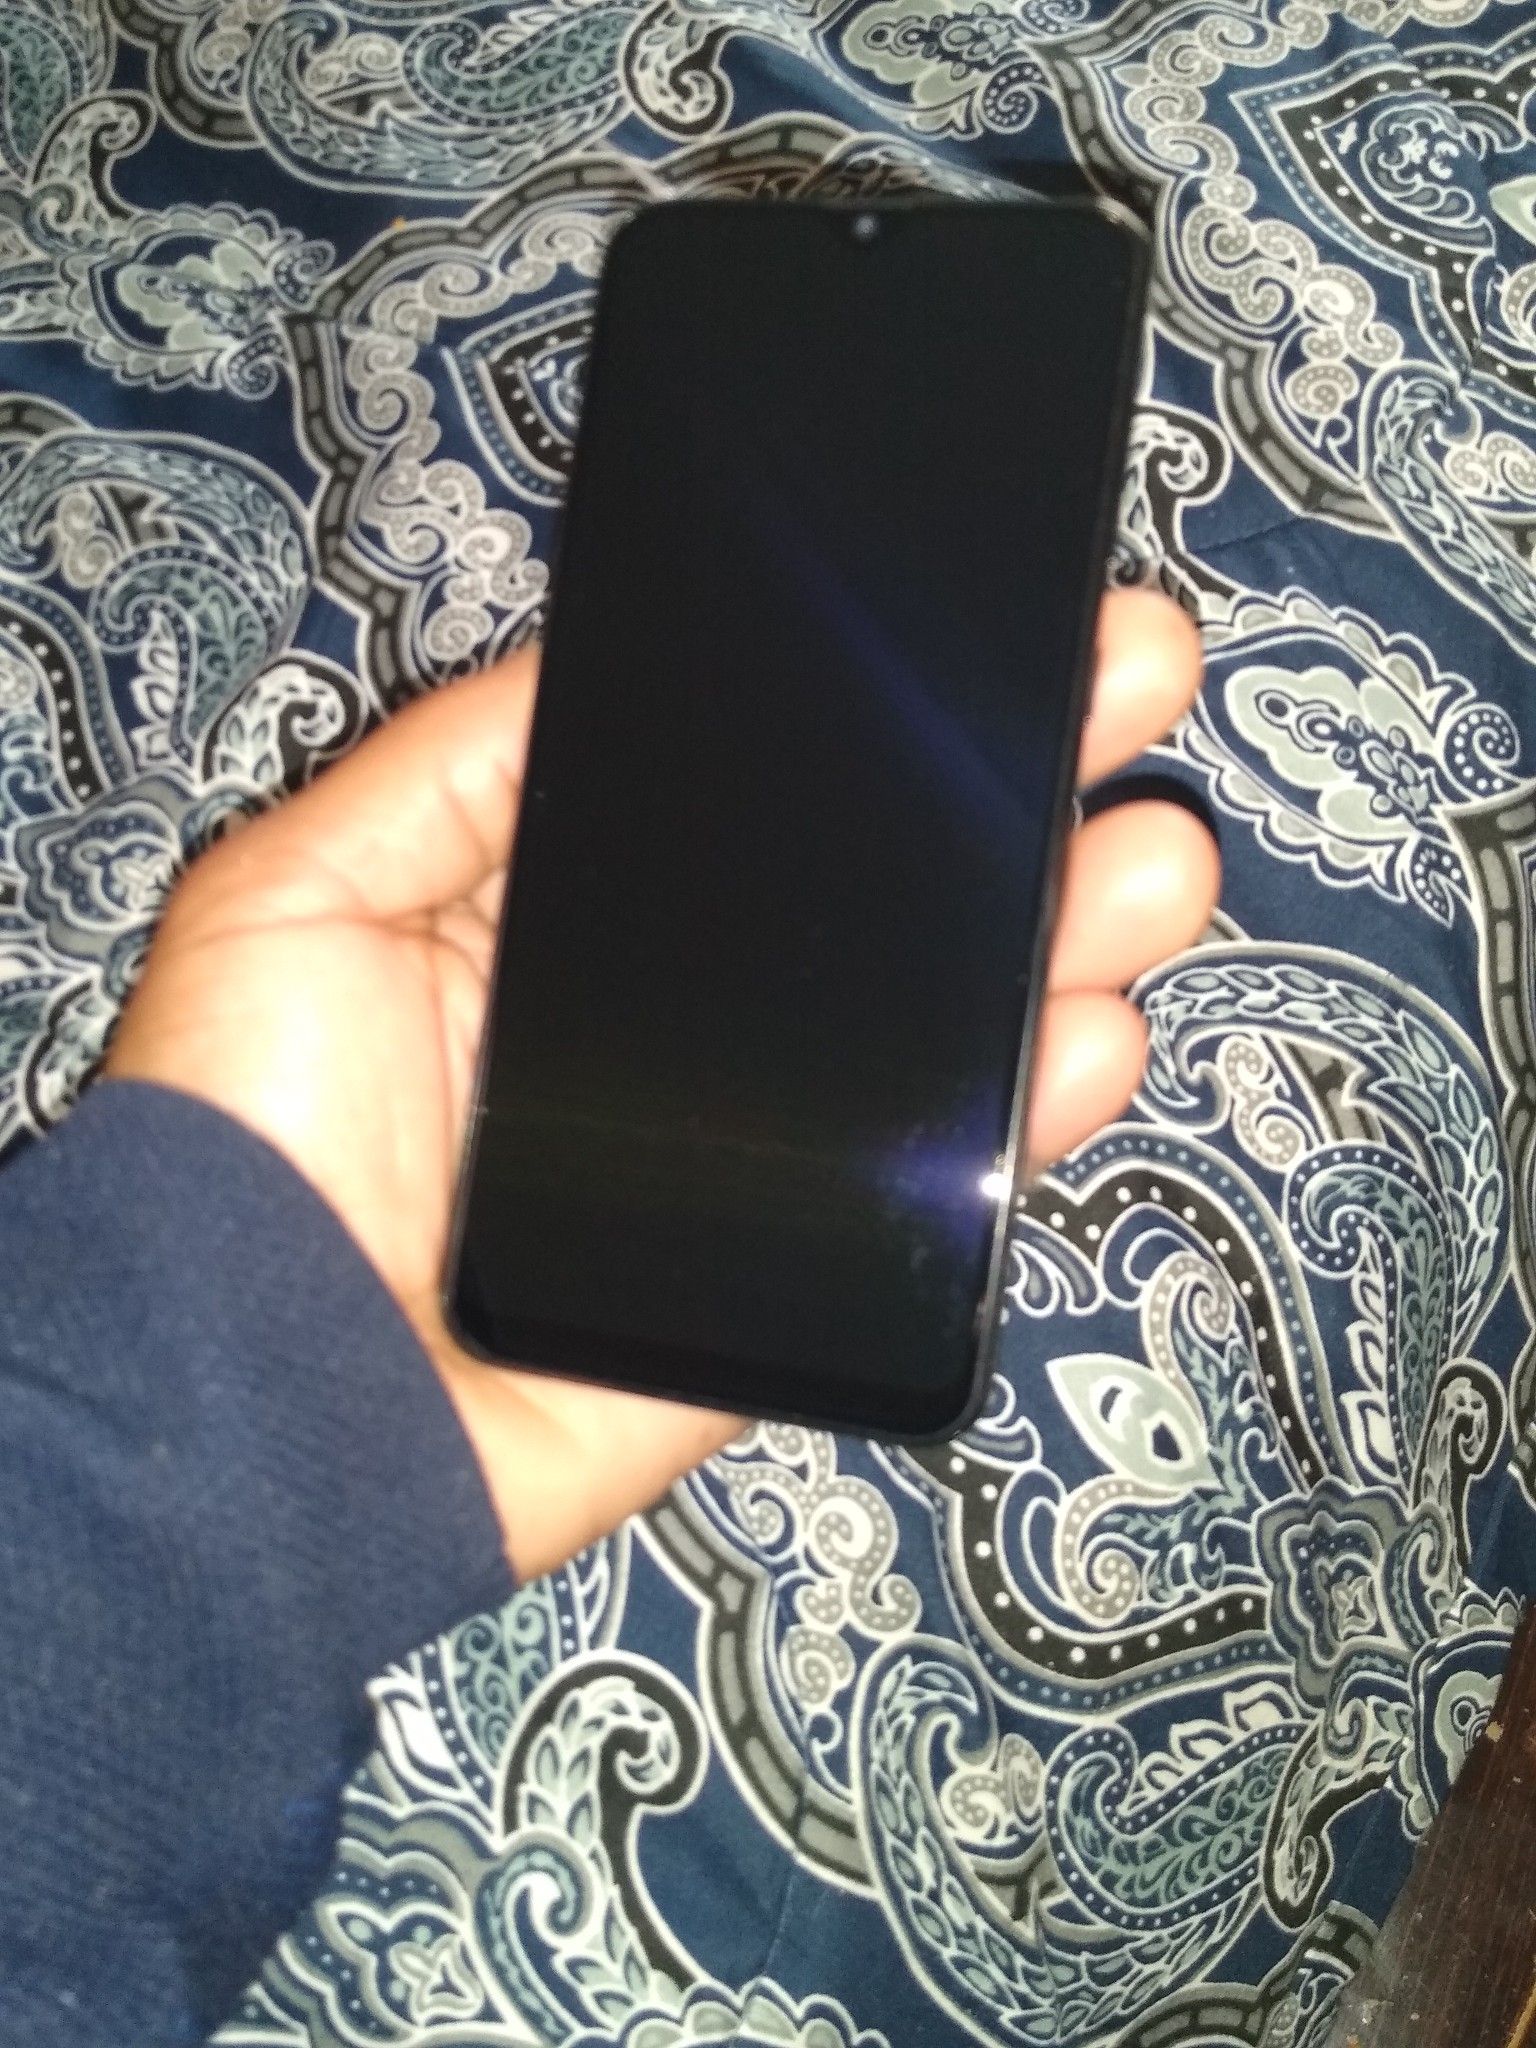 Samsung A 20, With charger, no scratches and still has plastic wrapped around the phone, boost Mobile, comes with case also